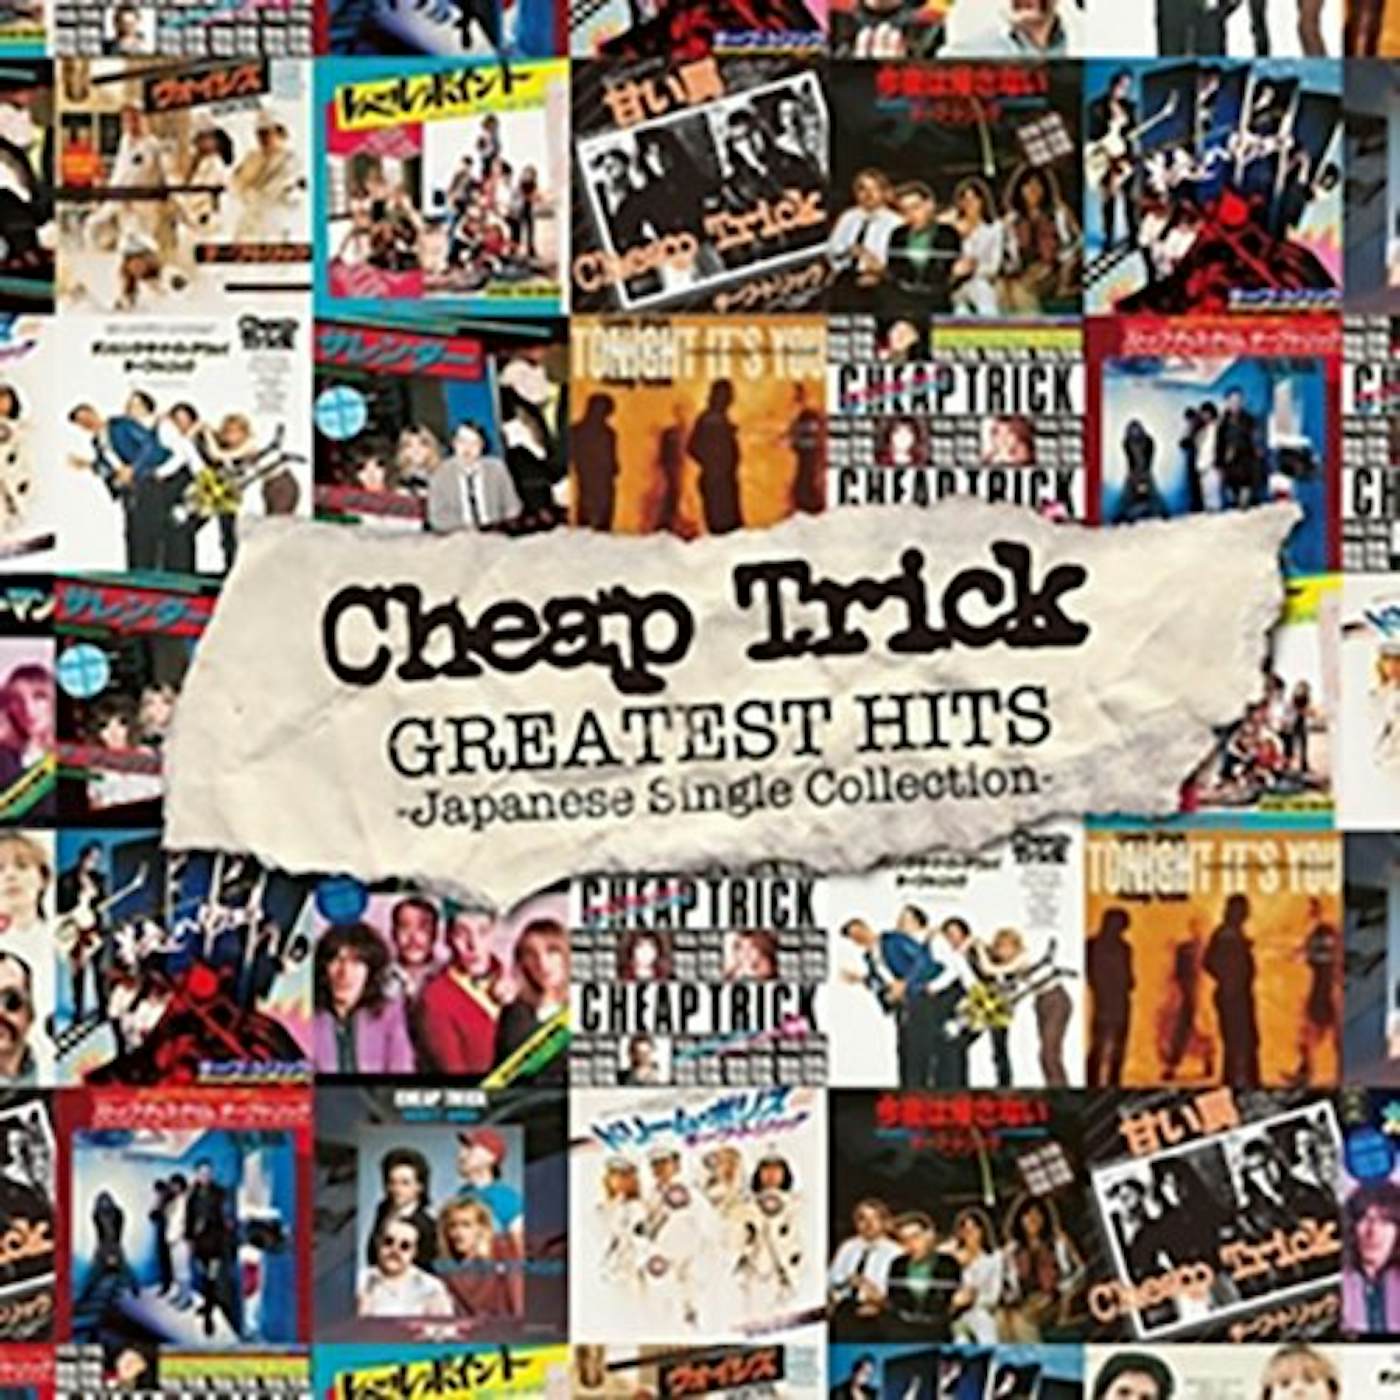 Cheap Trick JAPANESE SINGLES COLLECTION: GREATEST HITS CD